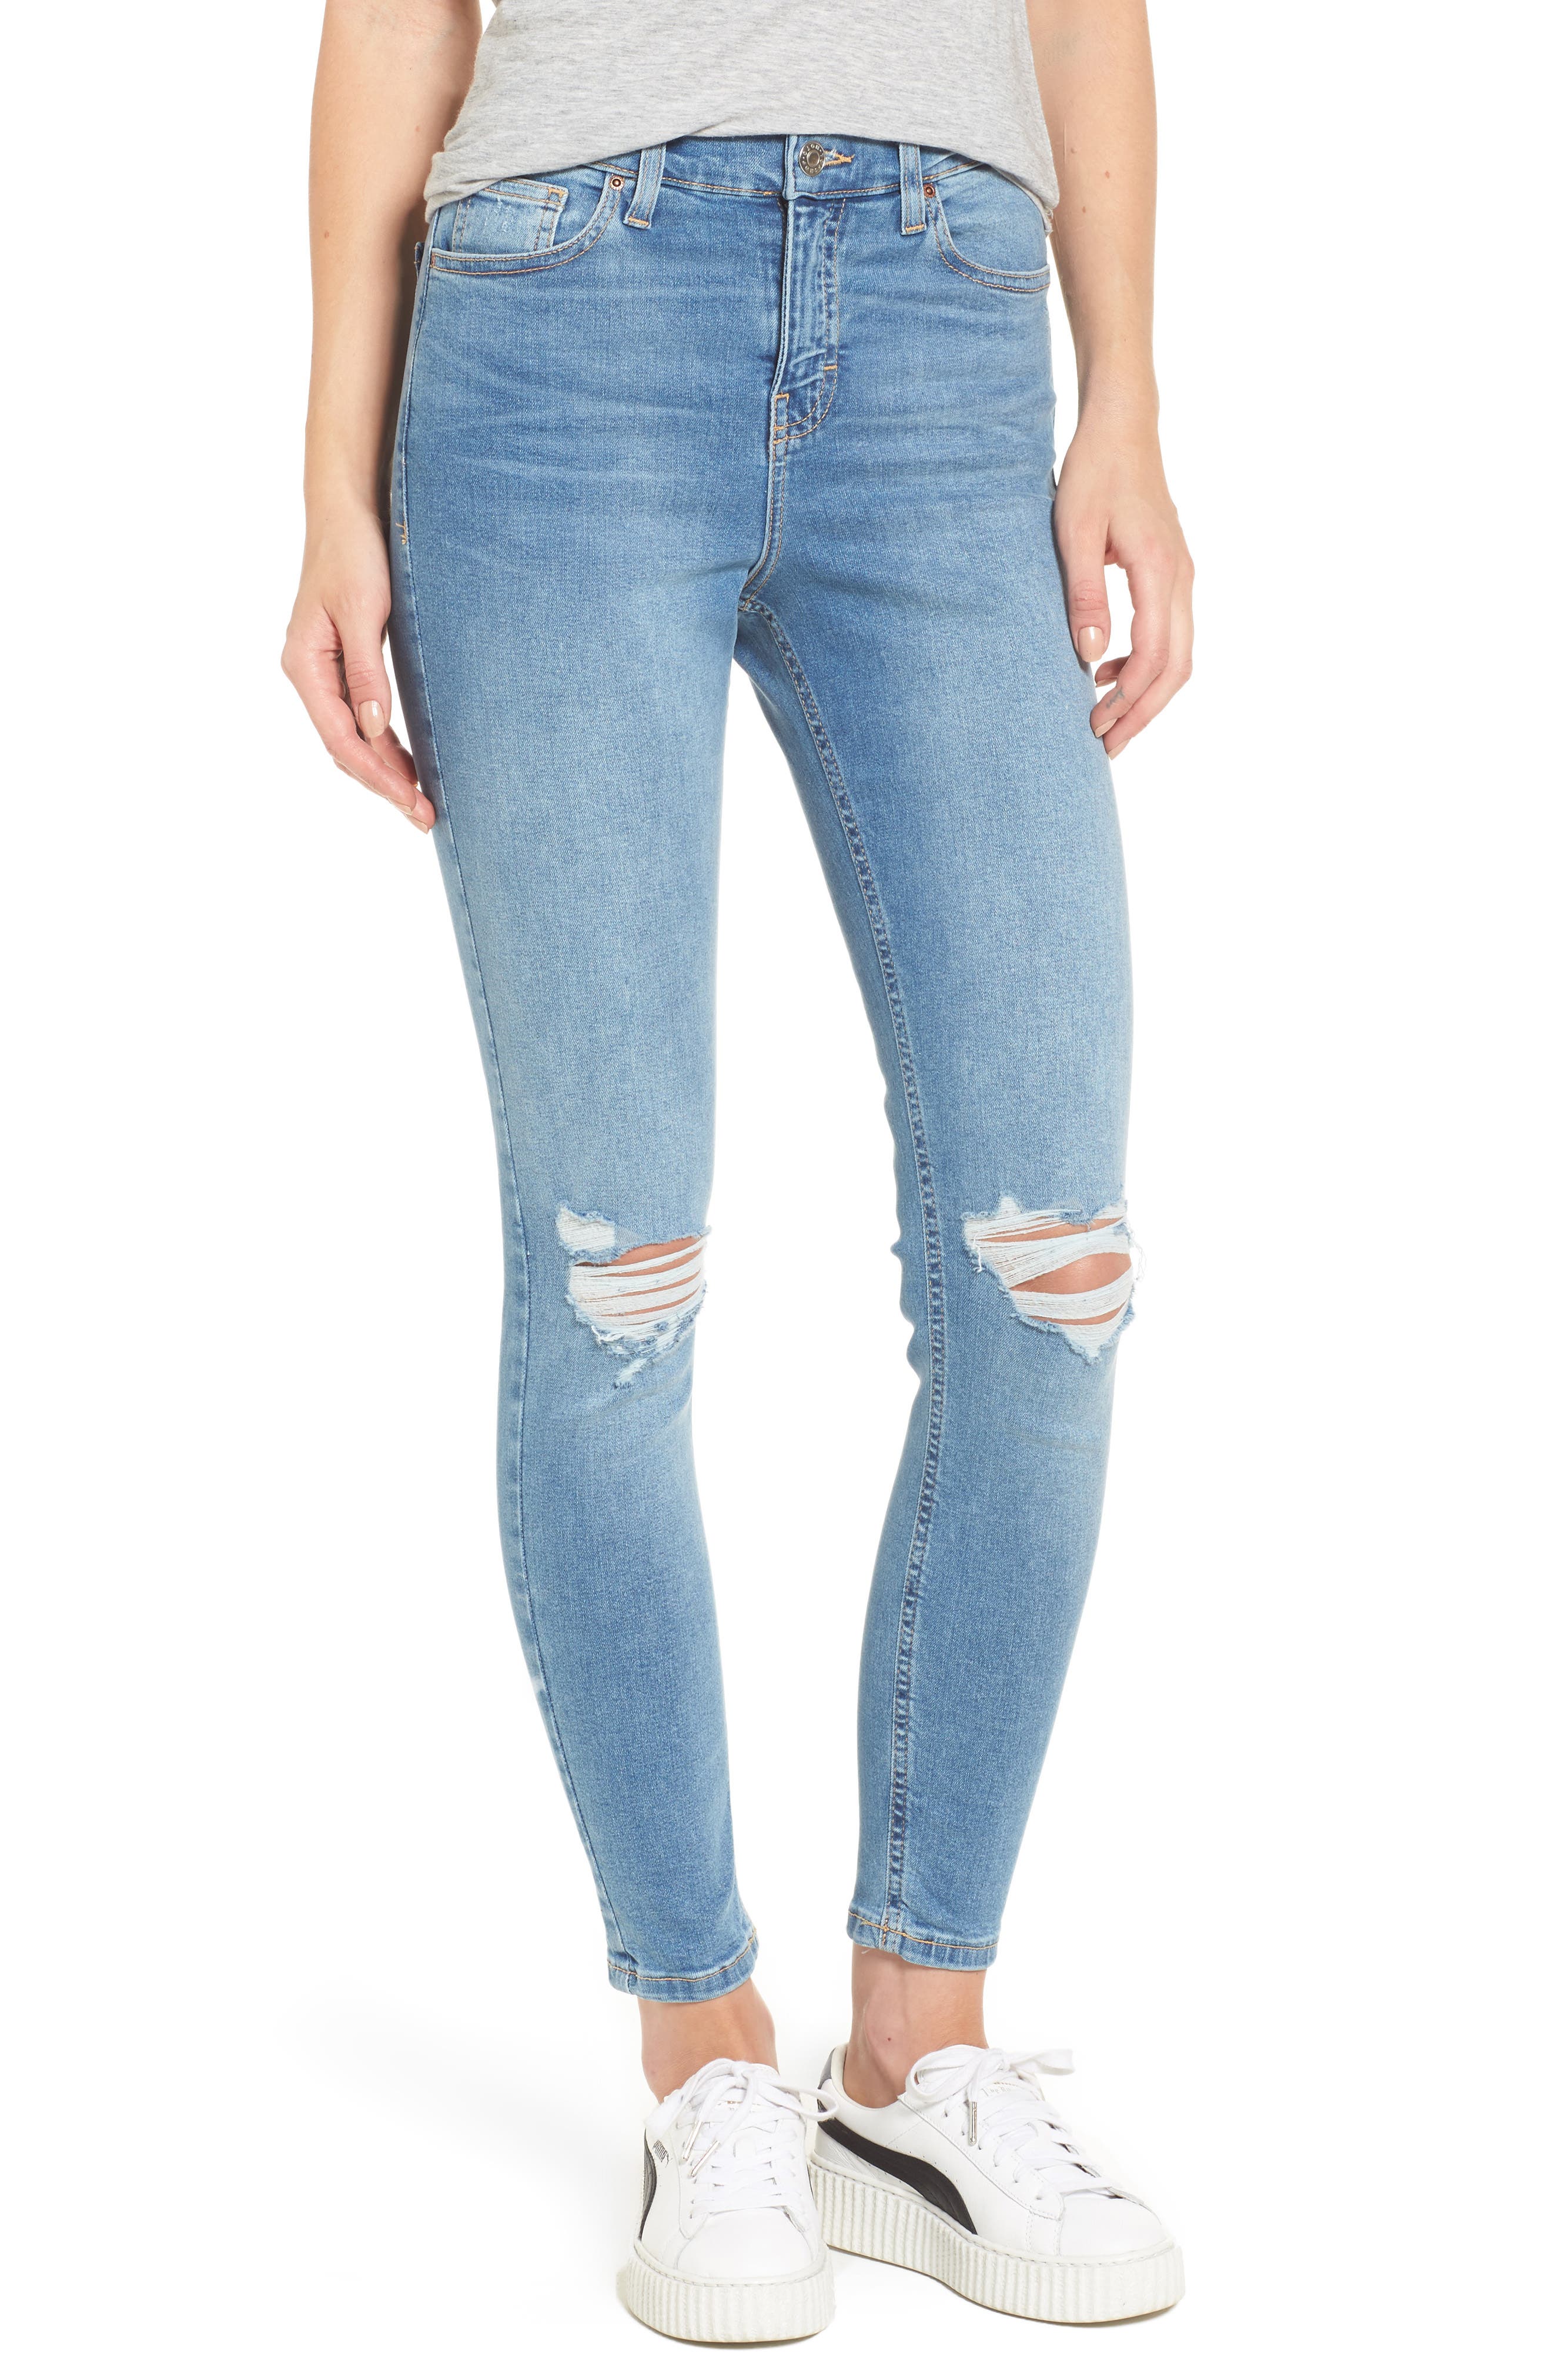 topshop moto jamie ripped jeans